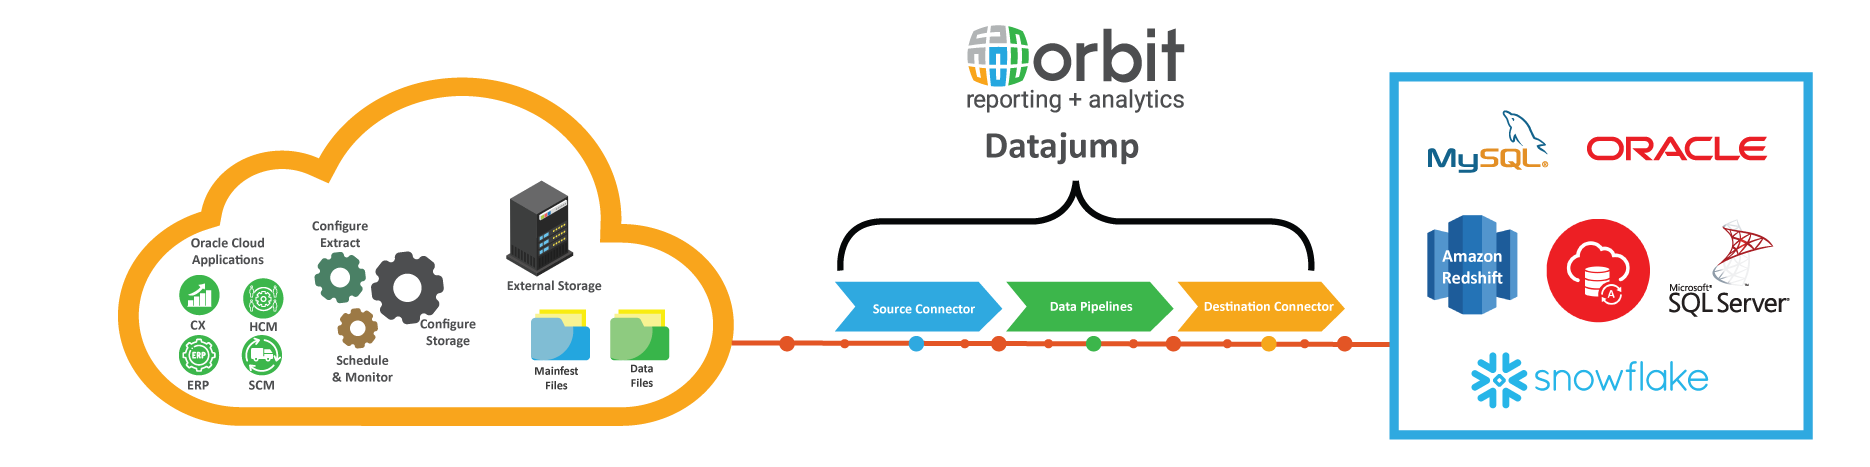 Orbit’s-Oracle-Fusion-Cloud-Data-Pipelines-for-Redshift